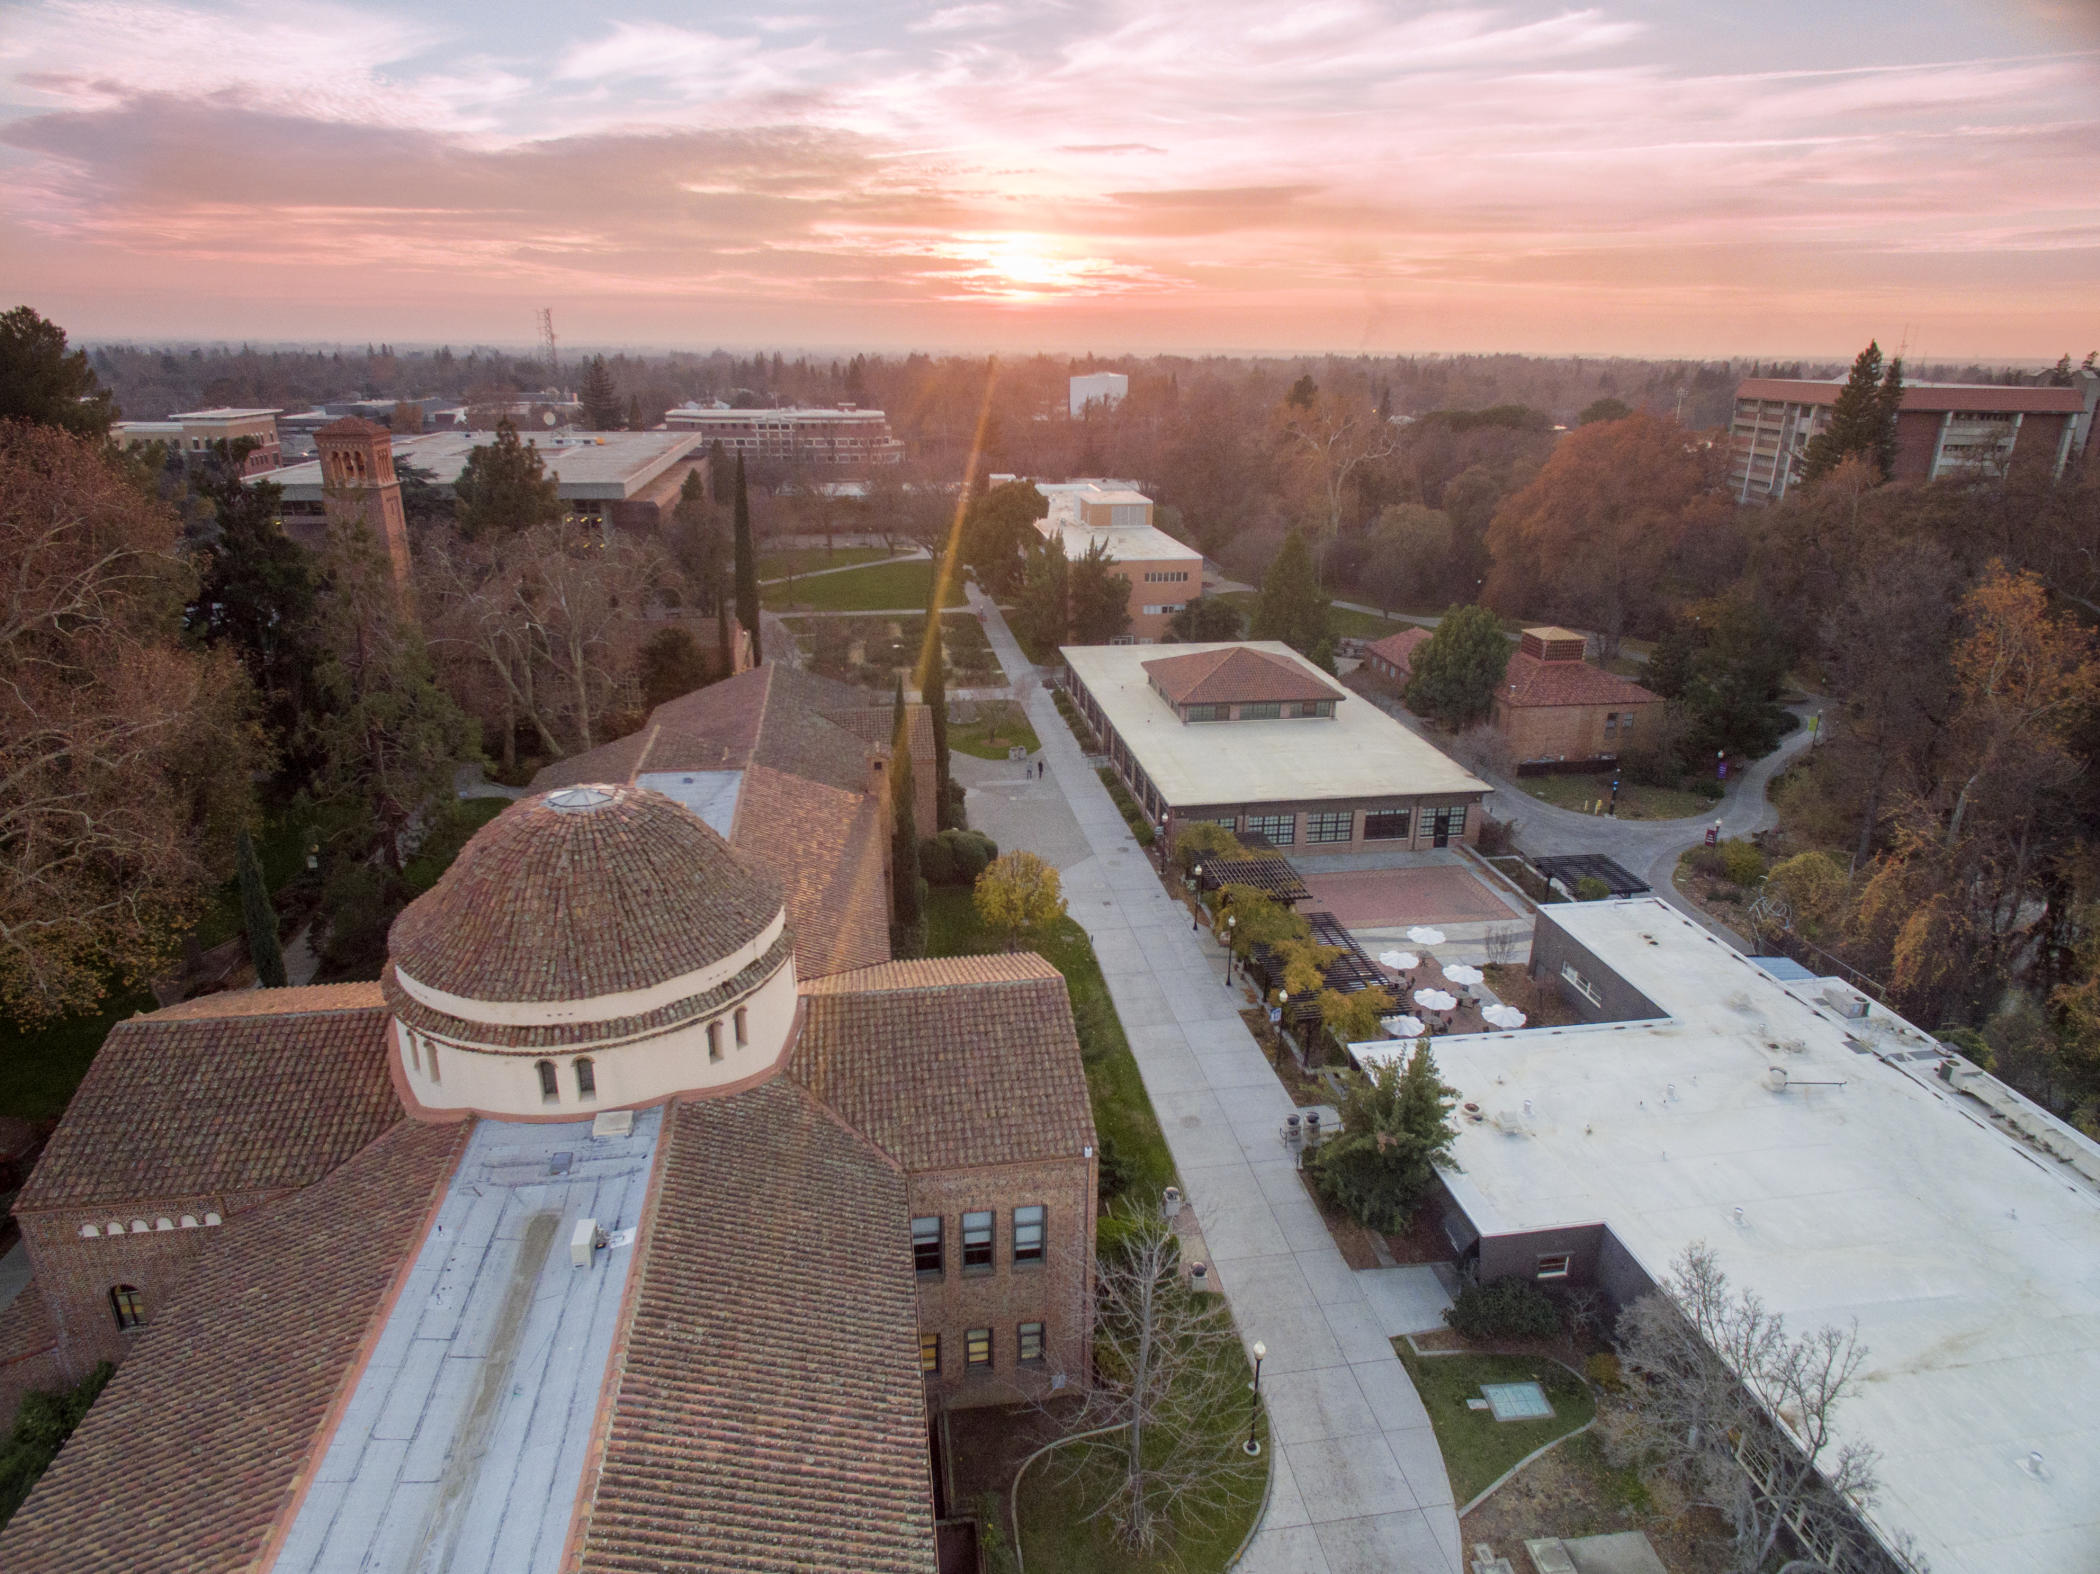 A drone photo of a sprawling college campus with the sun setting in the background.